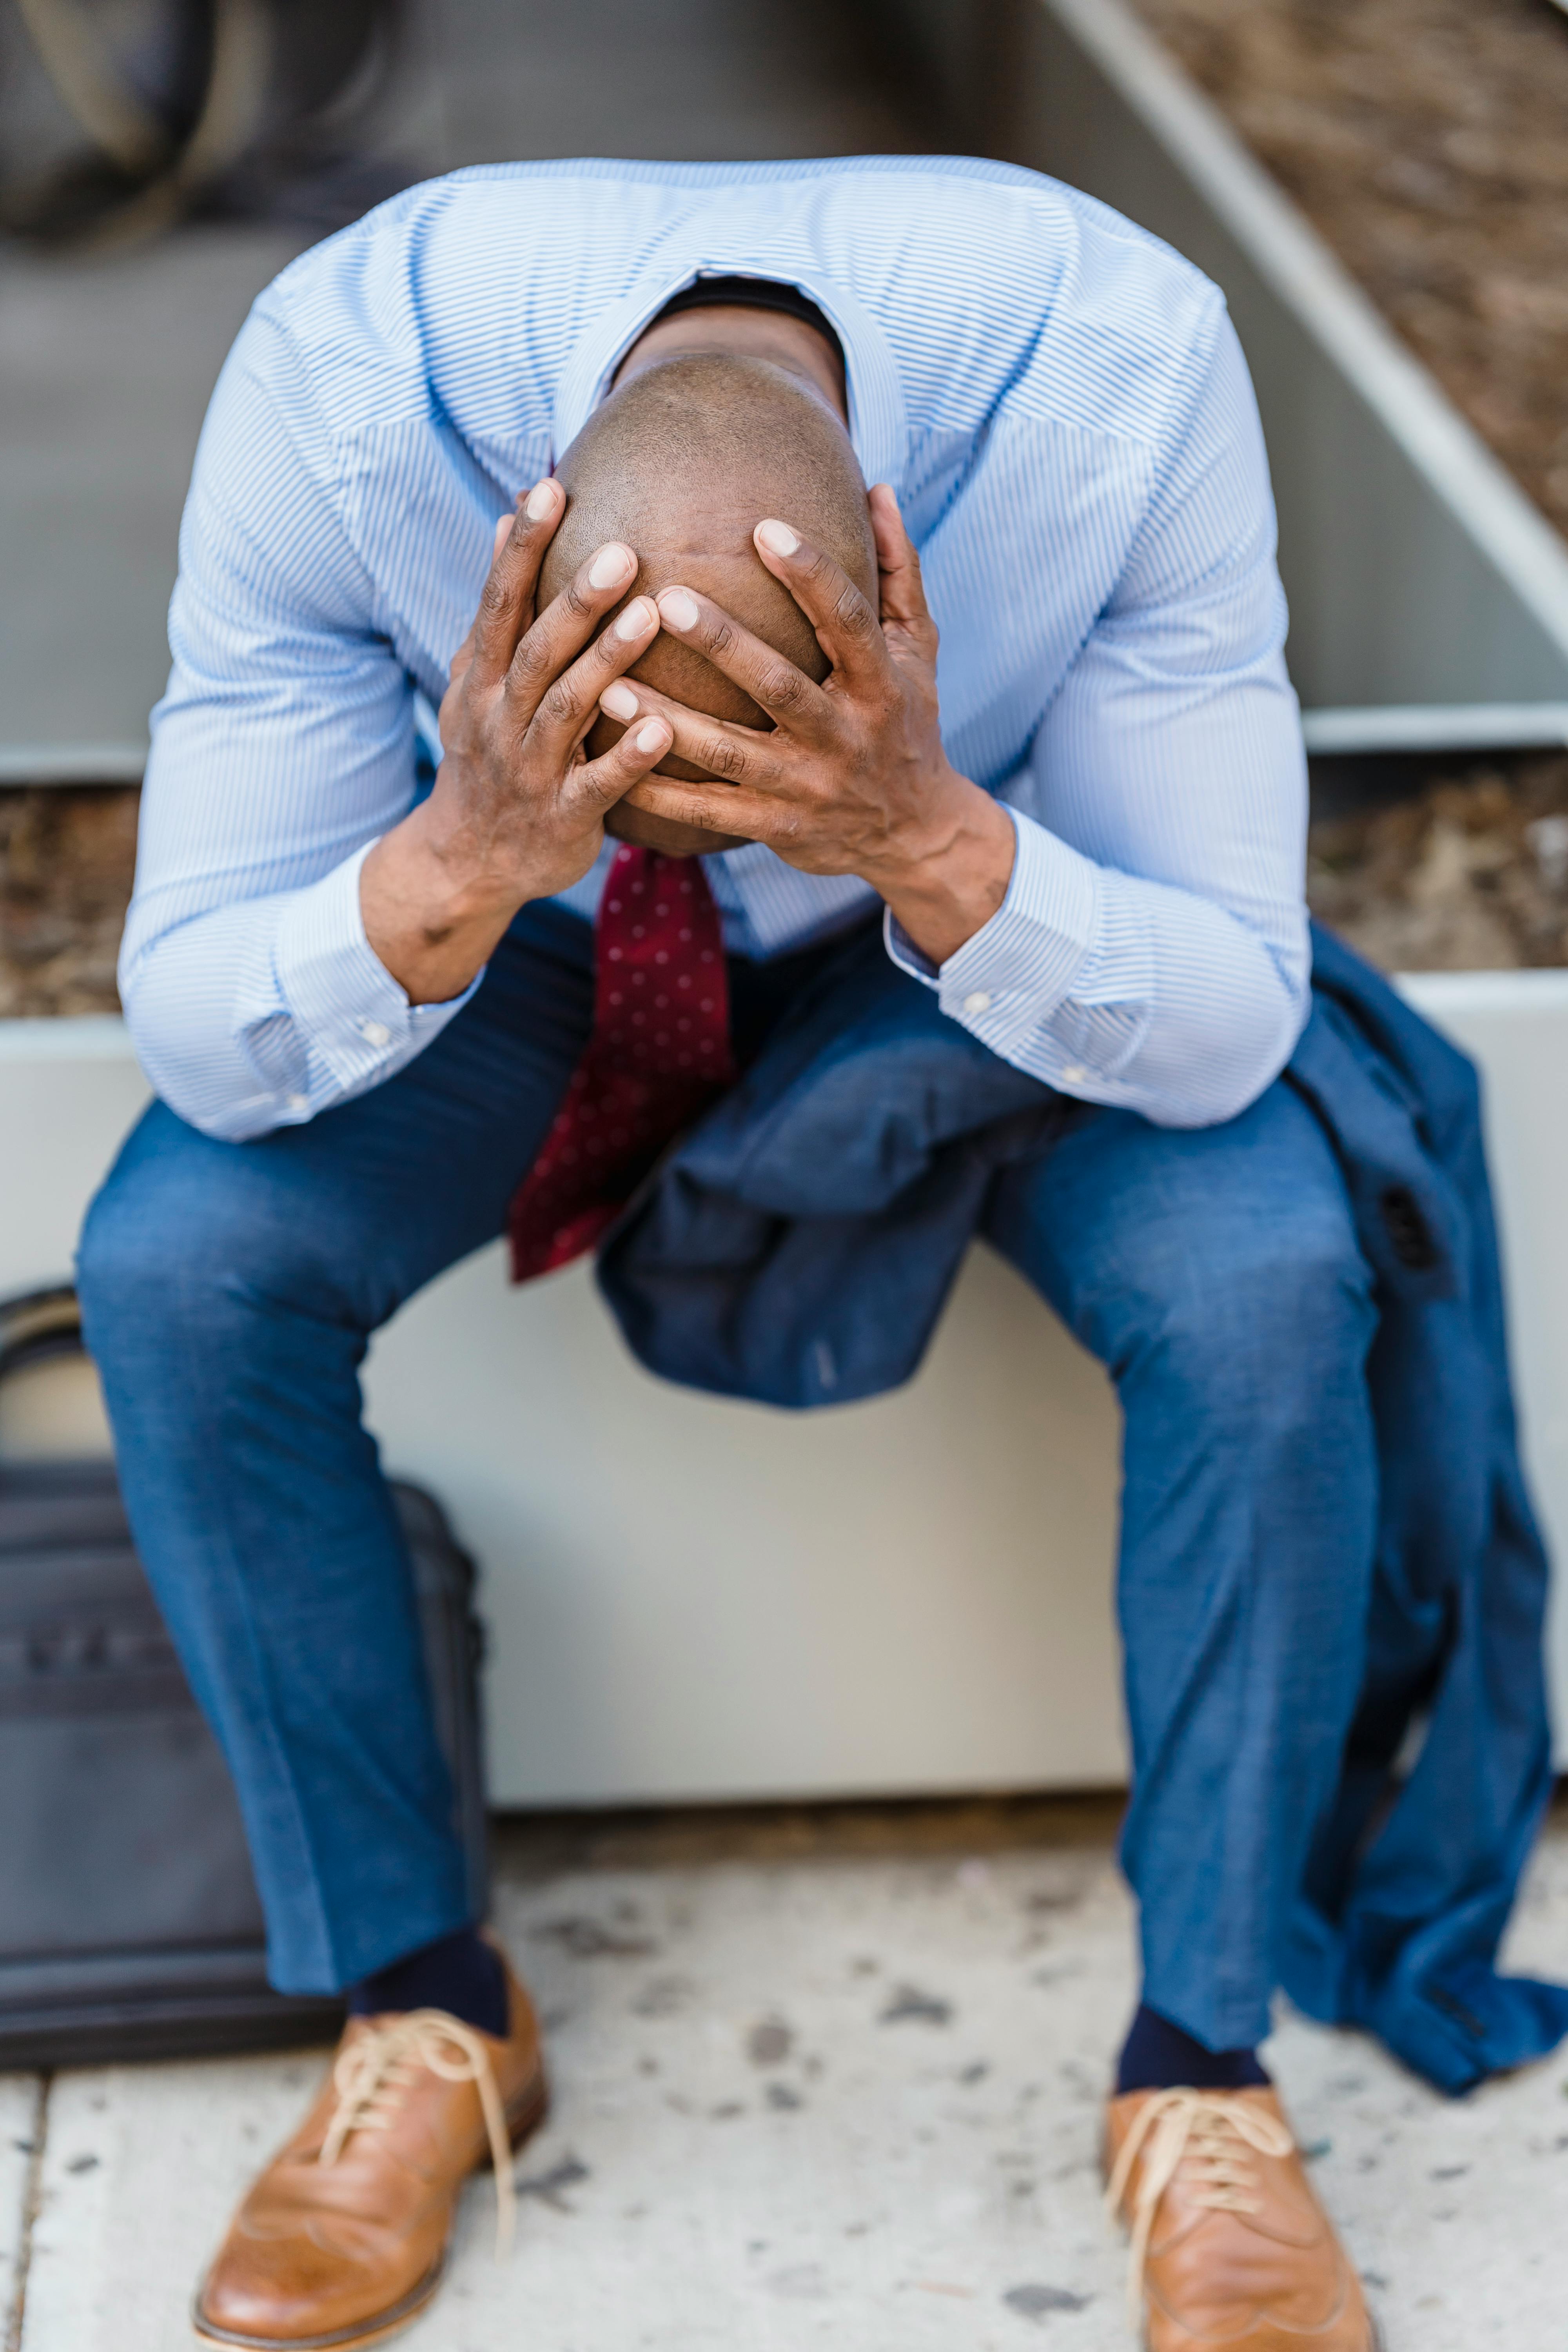 An upset man sitting and holding his head while bent over | Source: Pexels